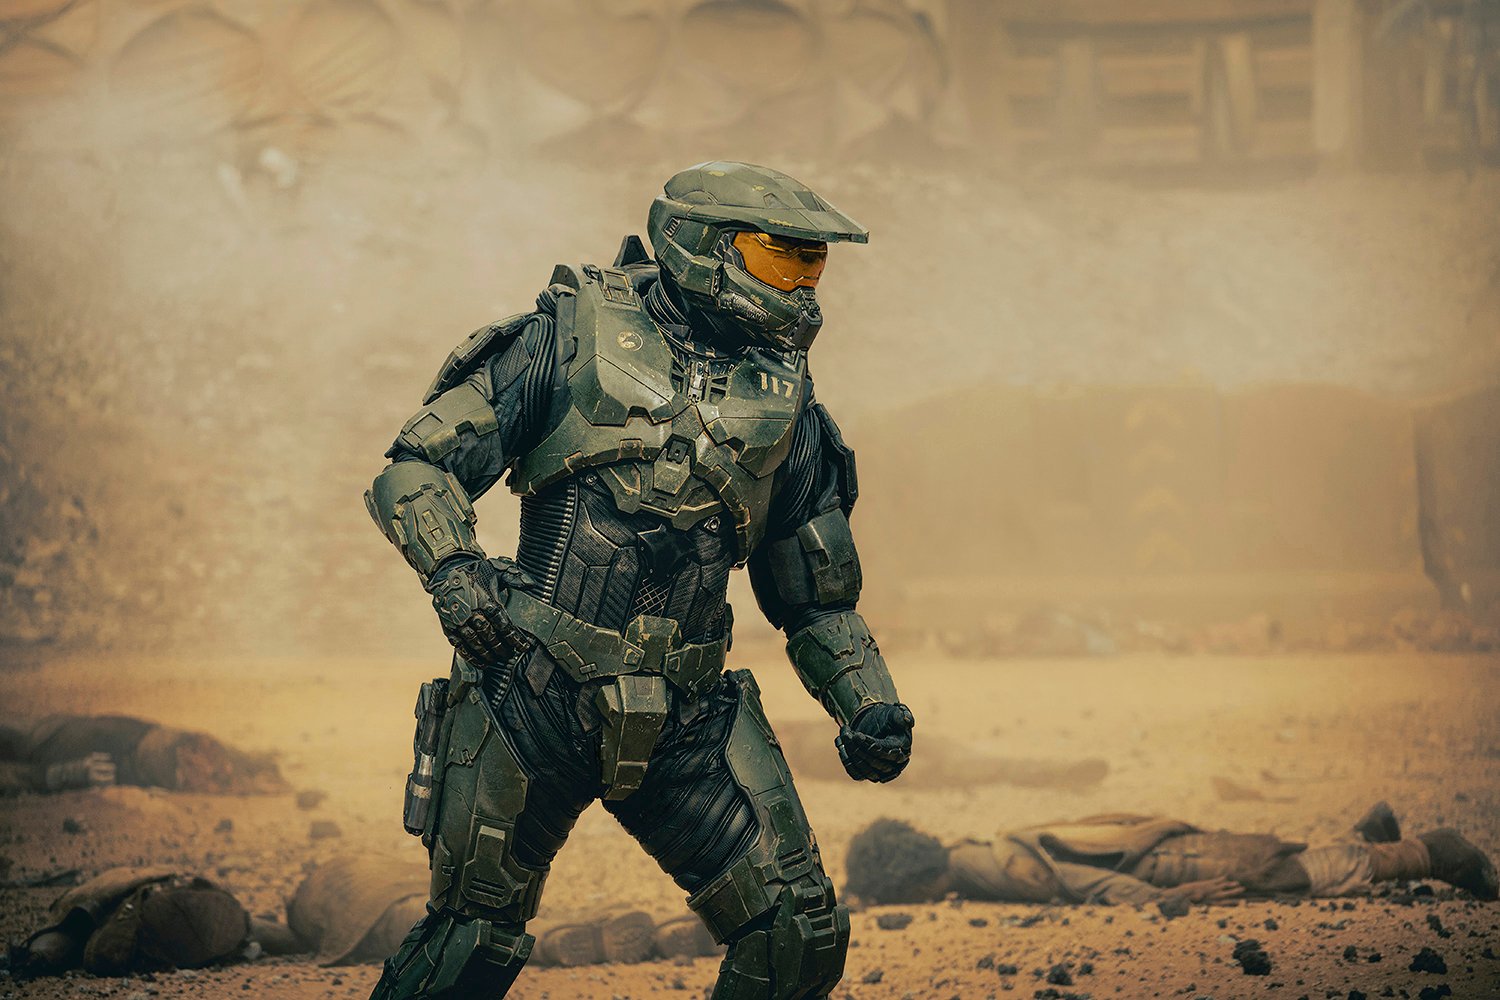 Halo TV series now on Paramount+: How to watch online, live stream